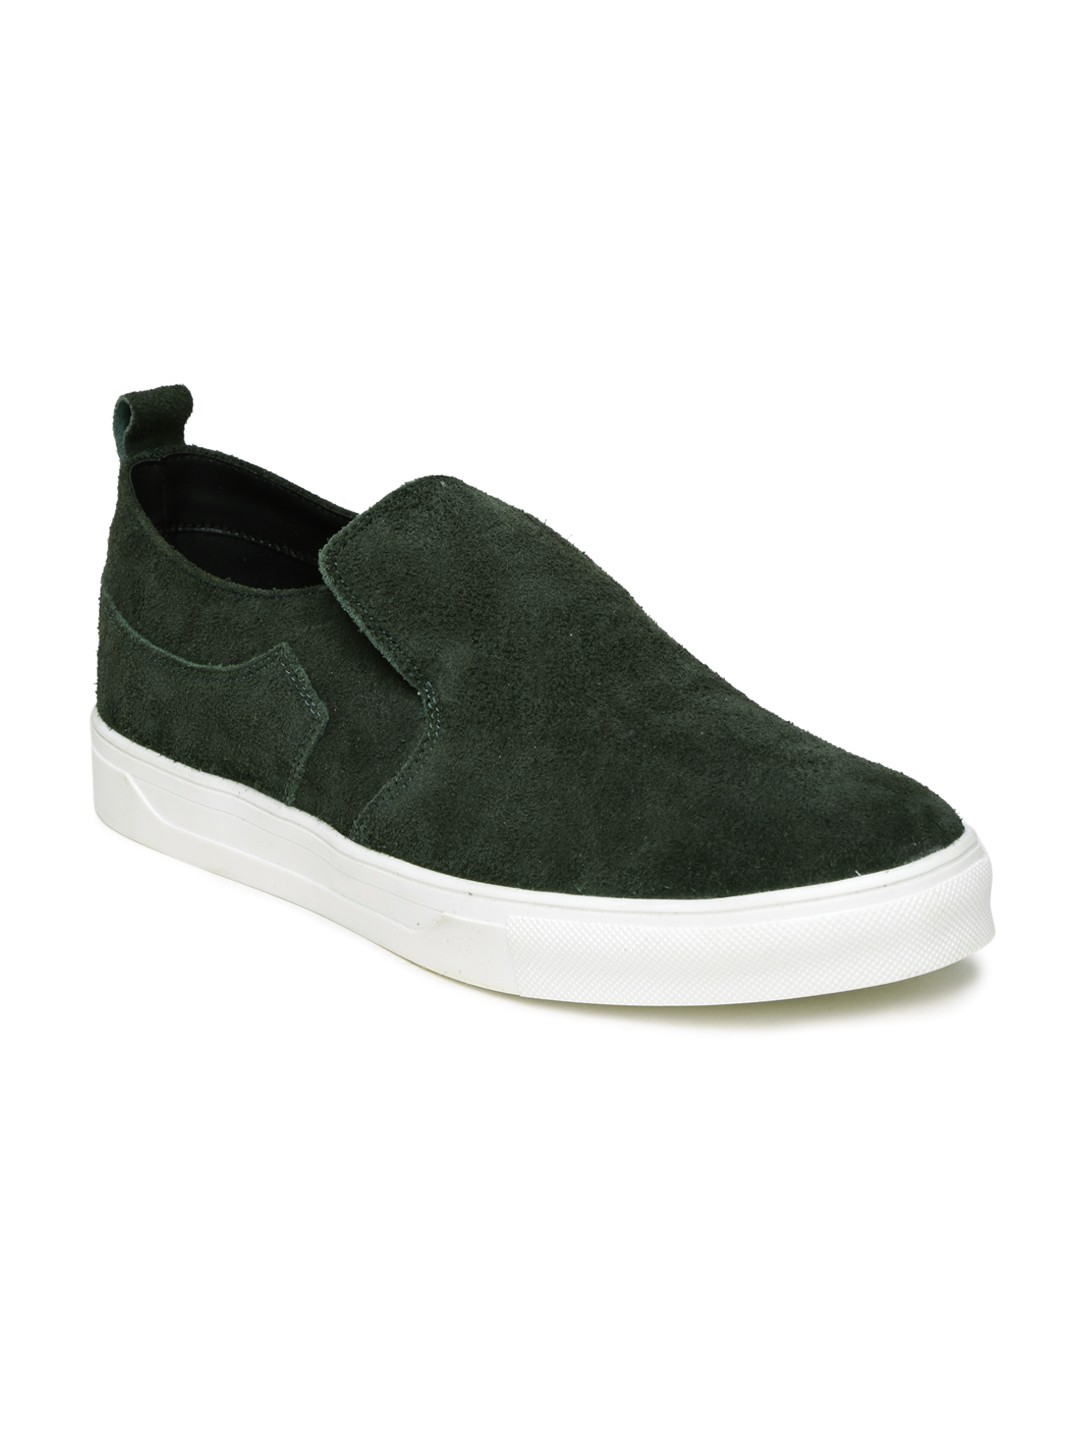 Roadster Men Olive Green Suede Casual Shoes